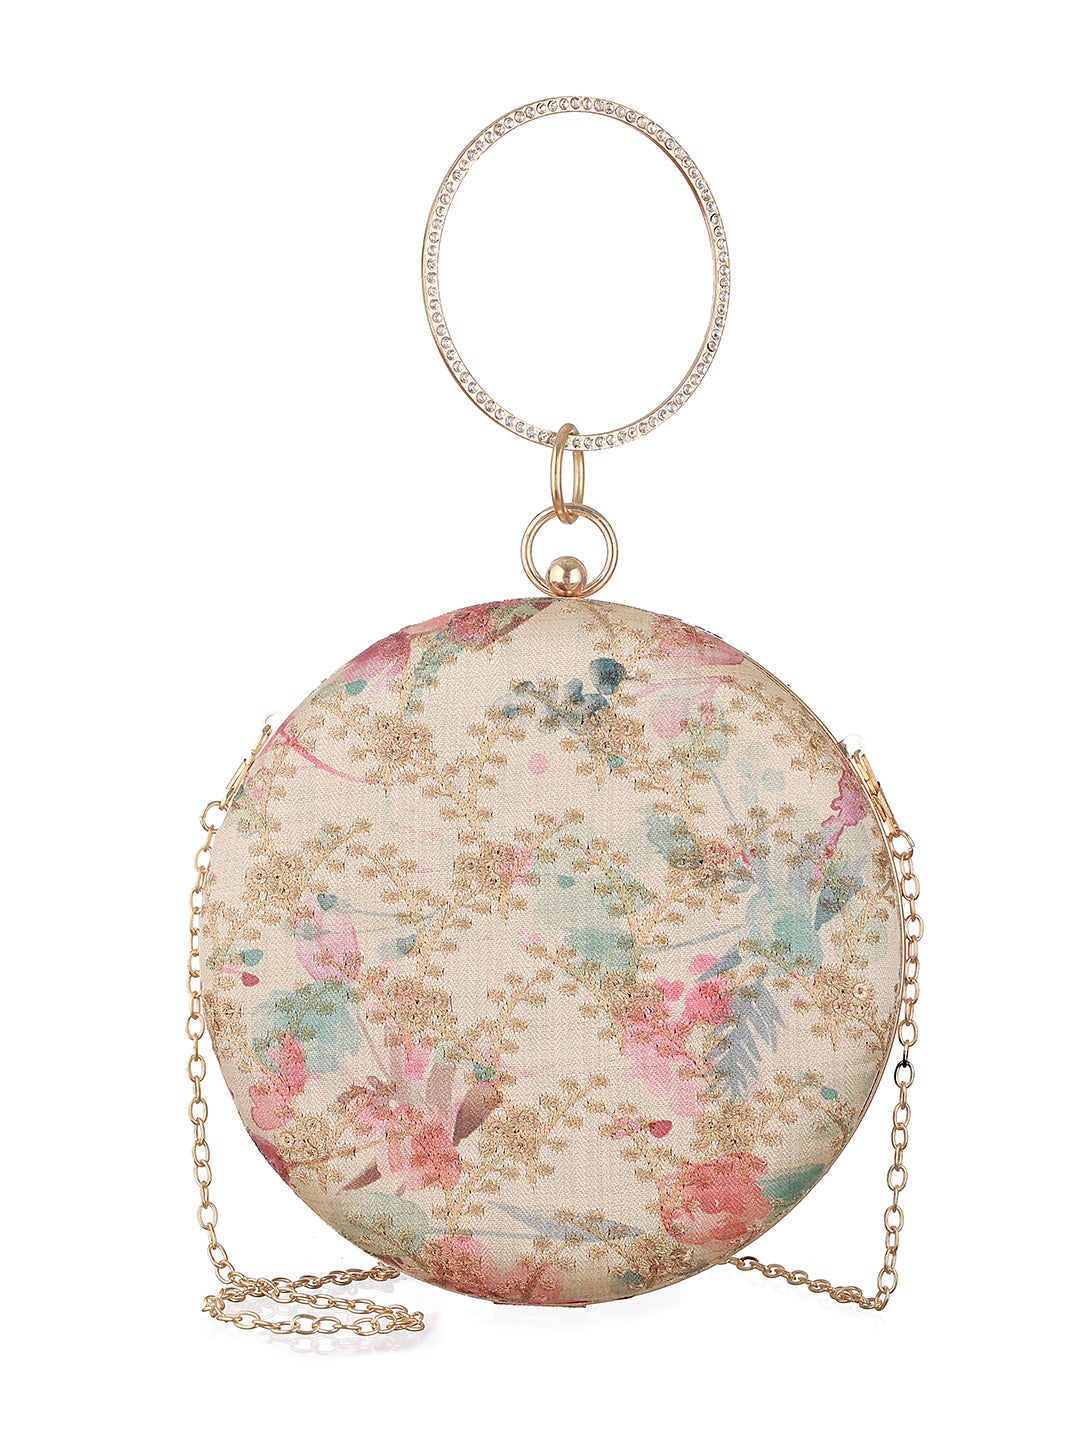 Spilled Hues Off-White Embroidered Round Clutch